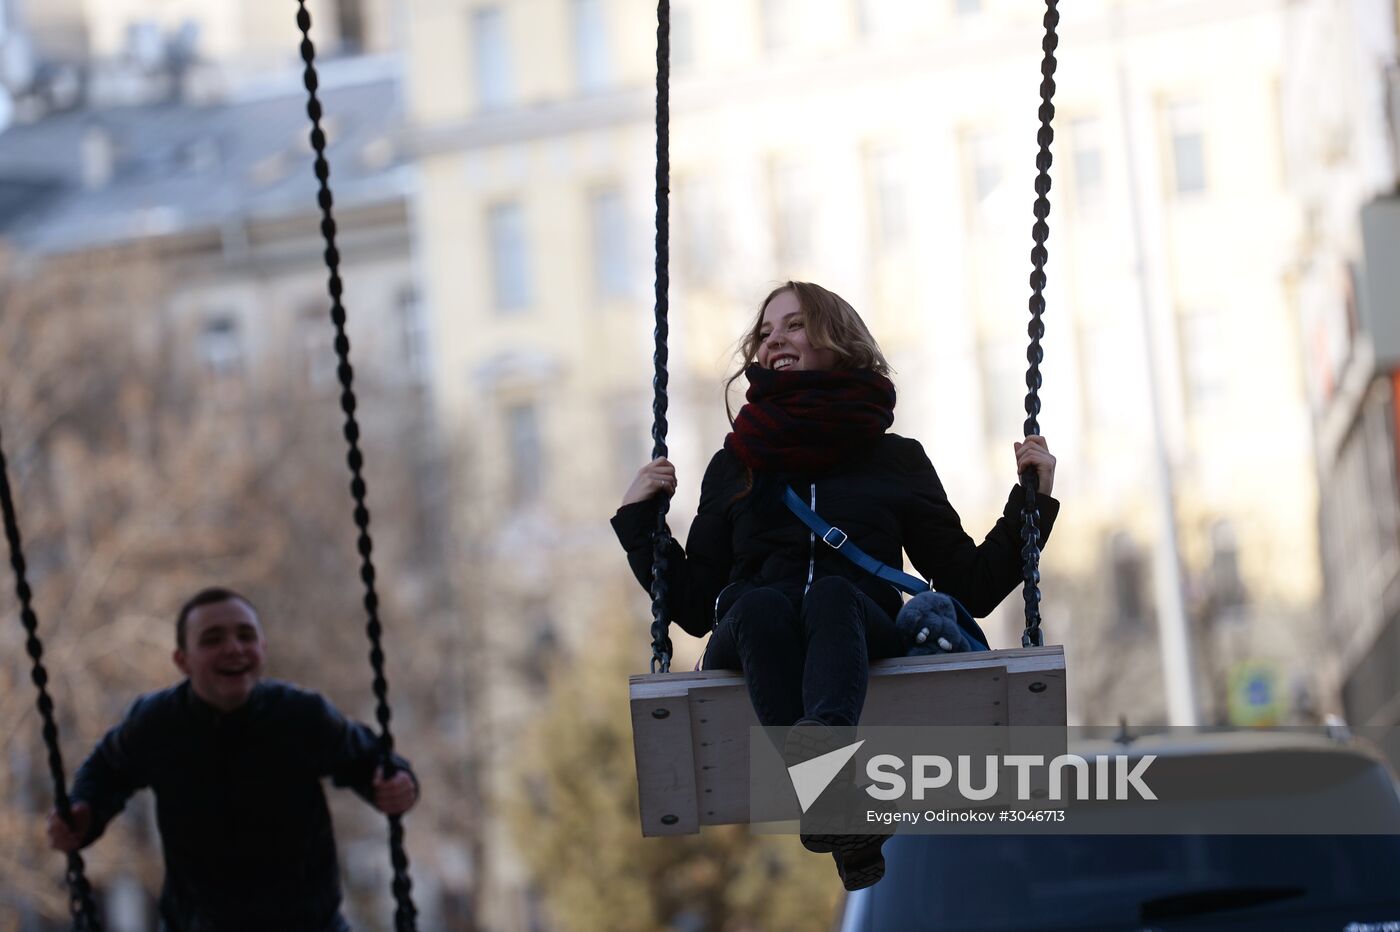 Leisure time activities in Moscow